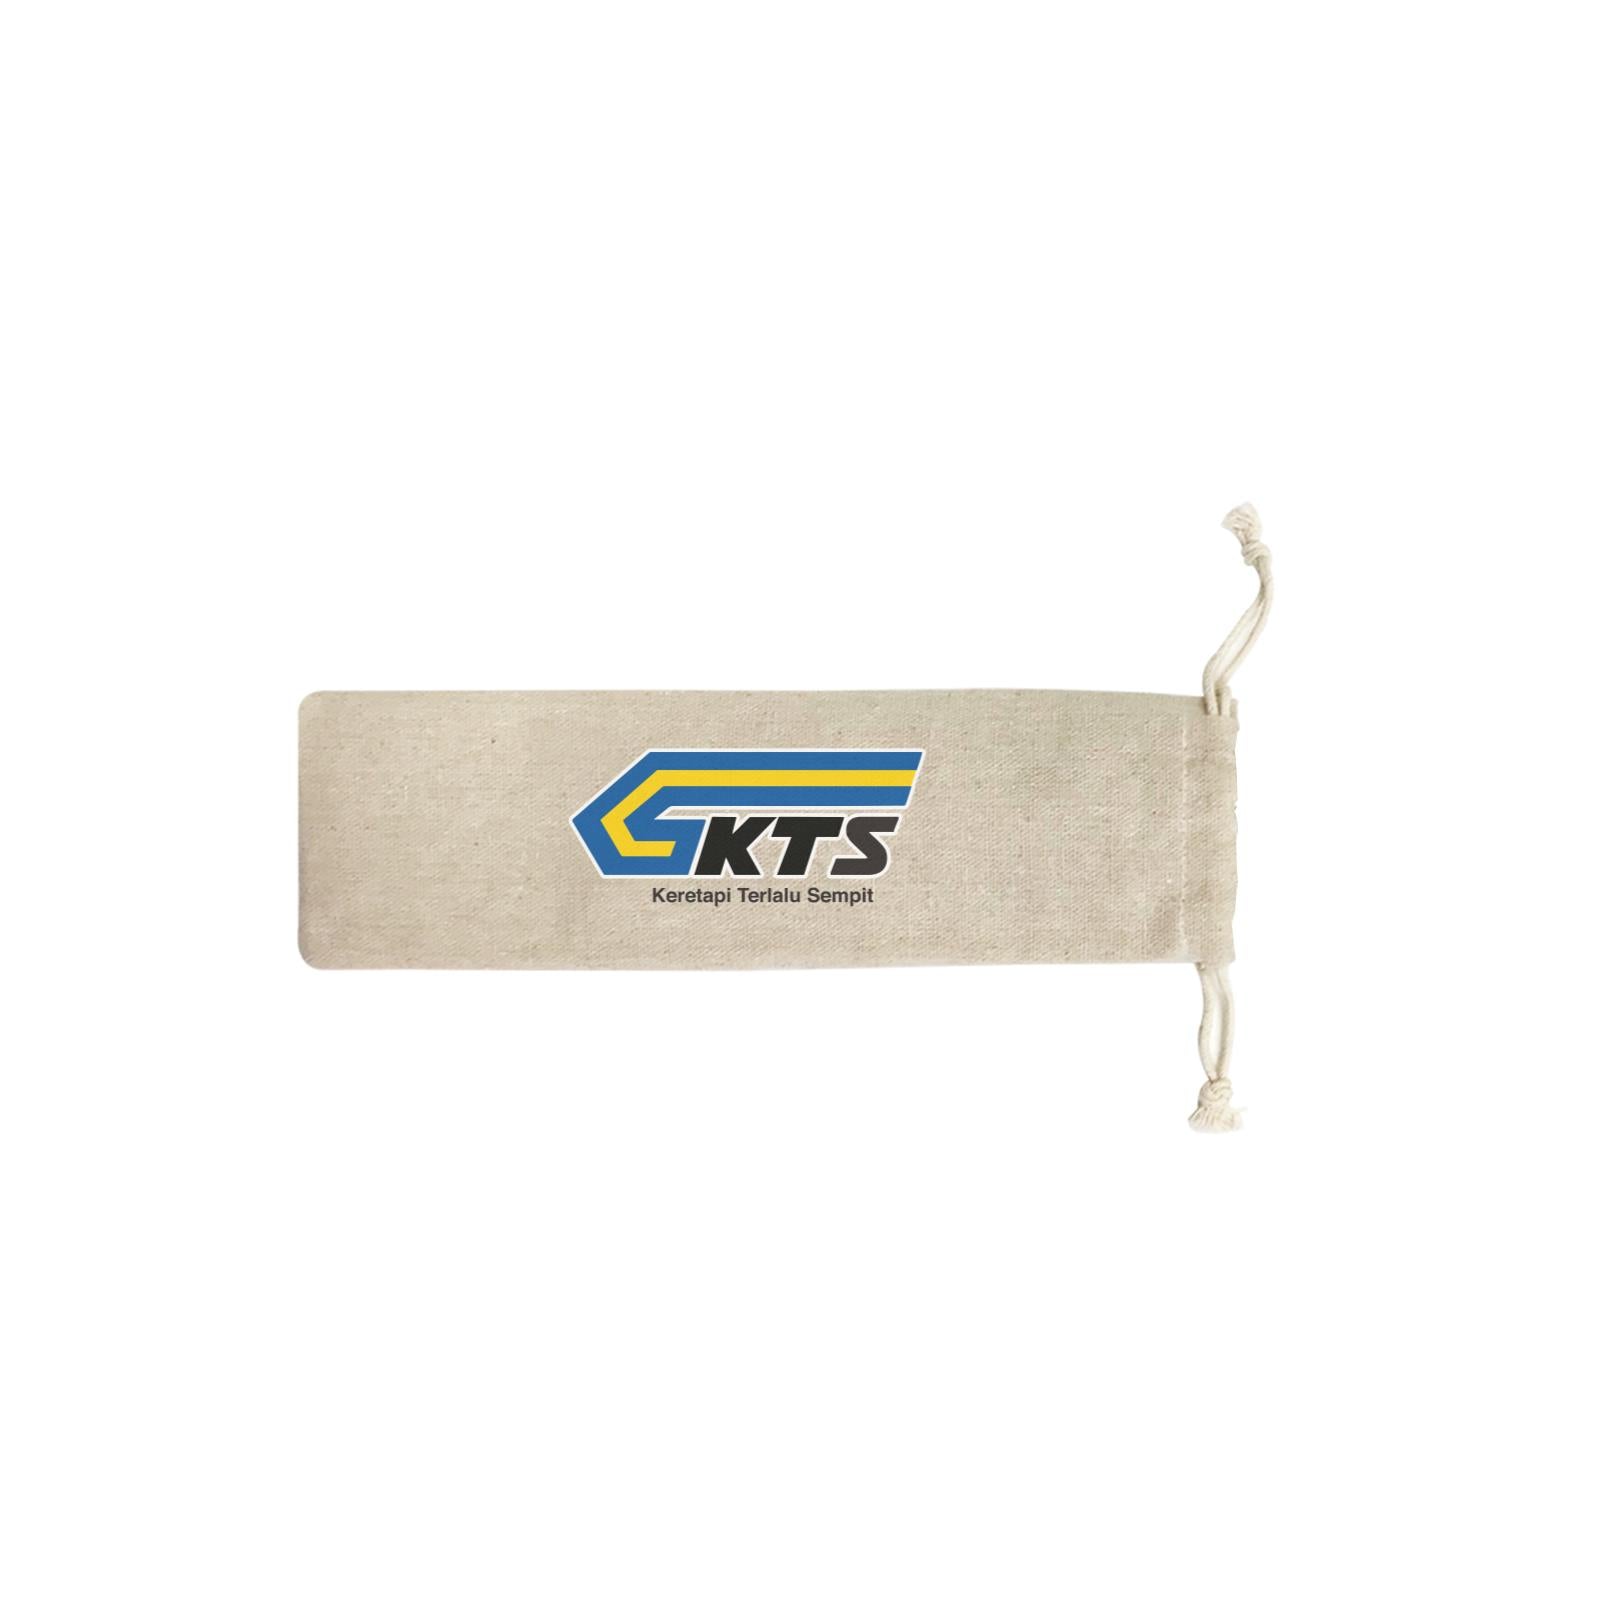 Slang Statement KTS SB Straw Pouch (No Straws included)